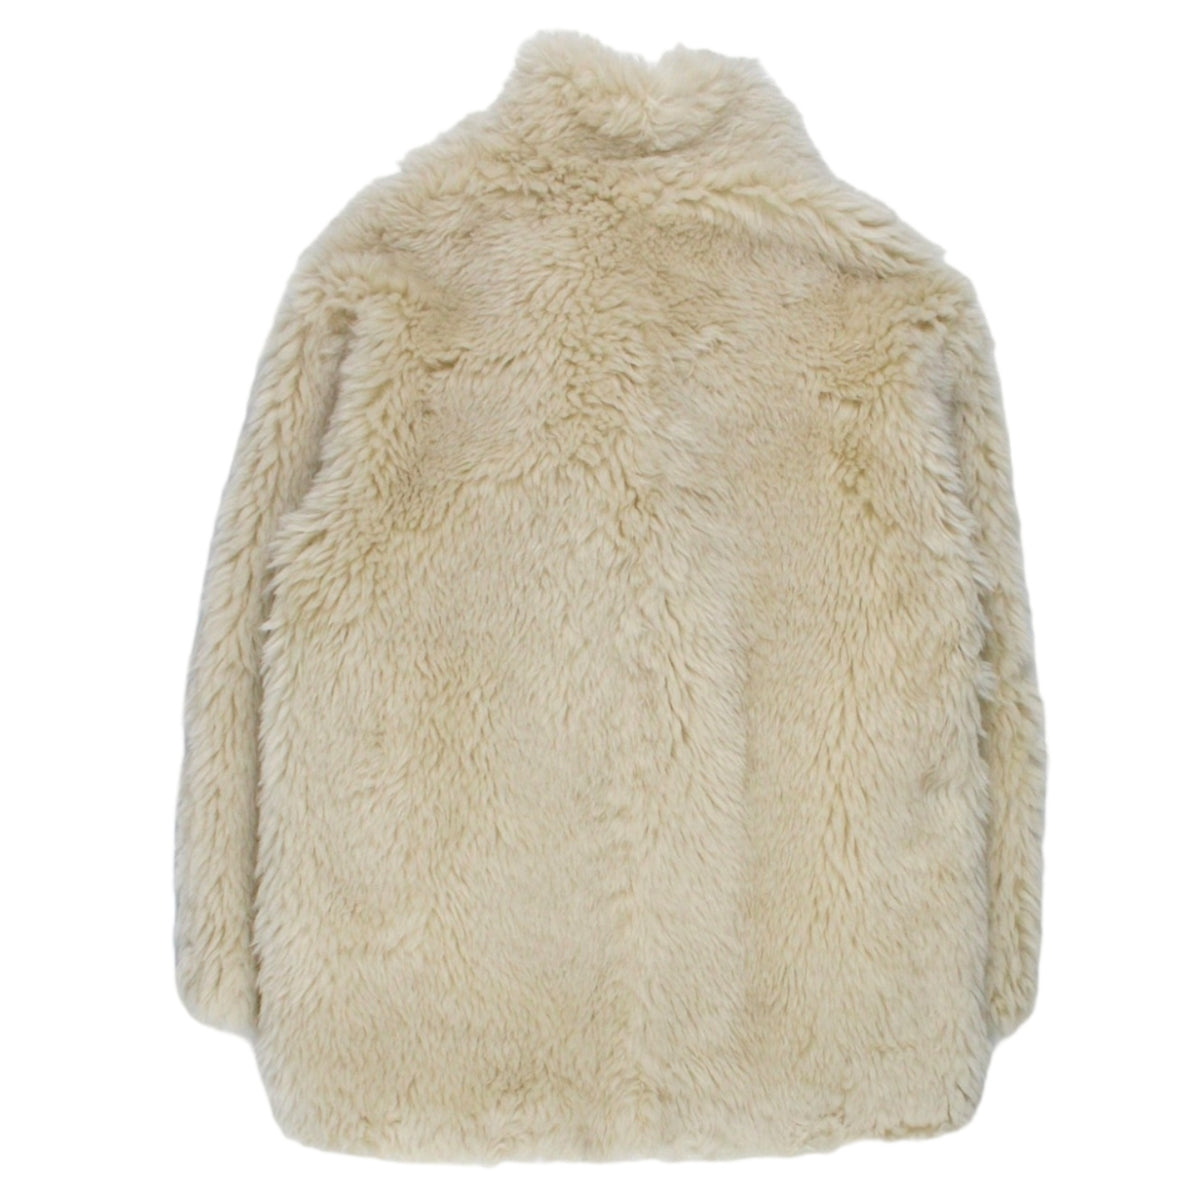 & Other Stories Cream Furry Wool Coat